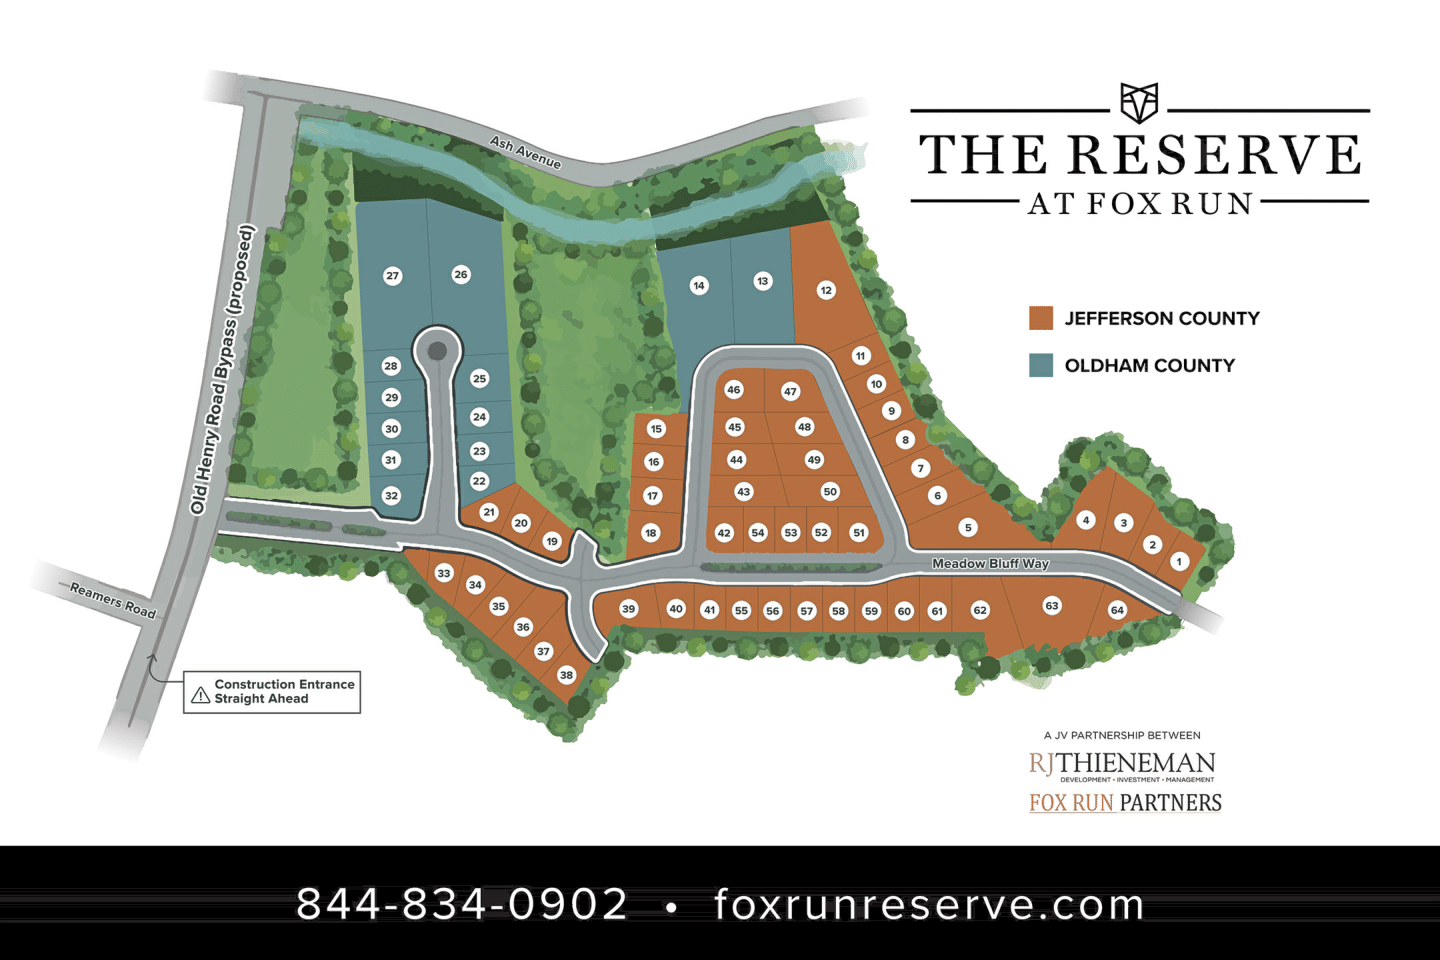 Visit The Reserve at Fox Run Live in Oldham County RJ Thieneman NEW